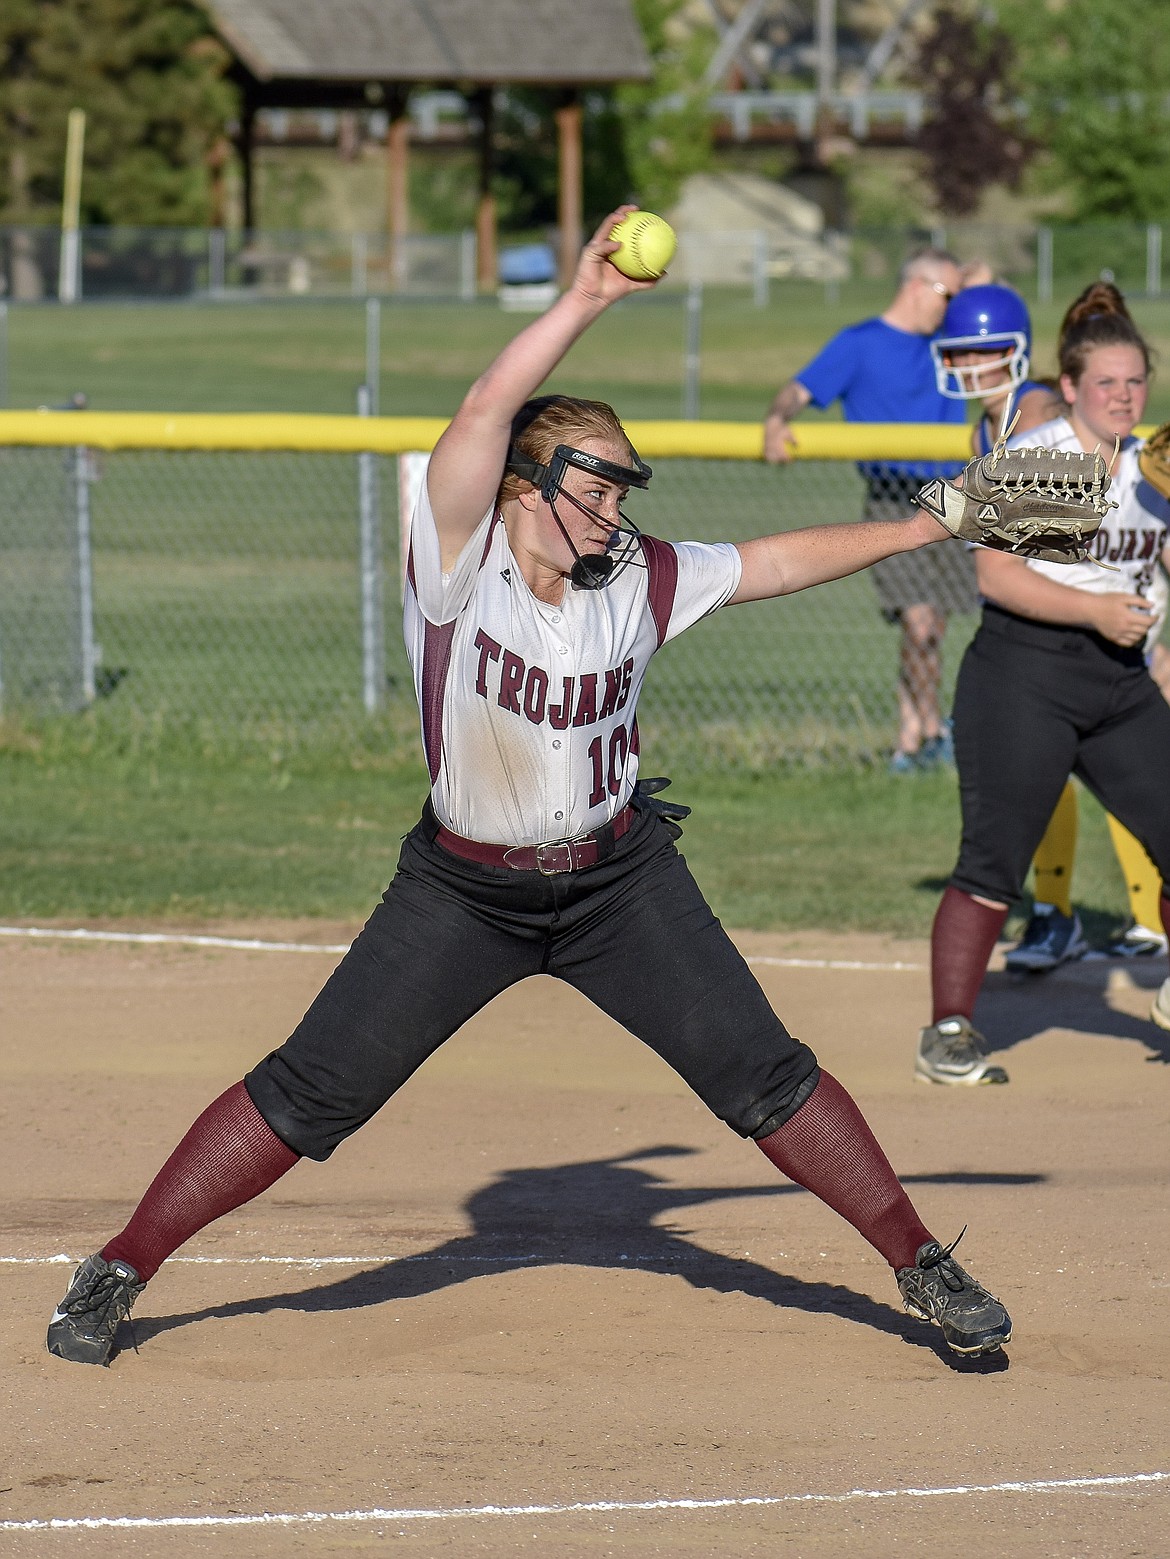 Troy sophomore pitcher Mazzy Hermes winds up a mighty pitch to end the game in the top of the seventh inning with a strikeout, during the Lady Trojans&#146; 16-14 play-in win against the Lady Hawks Tuesday, May 15.